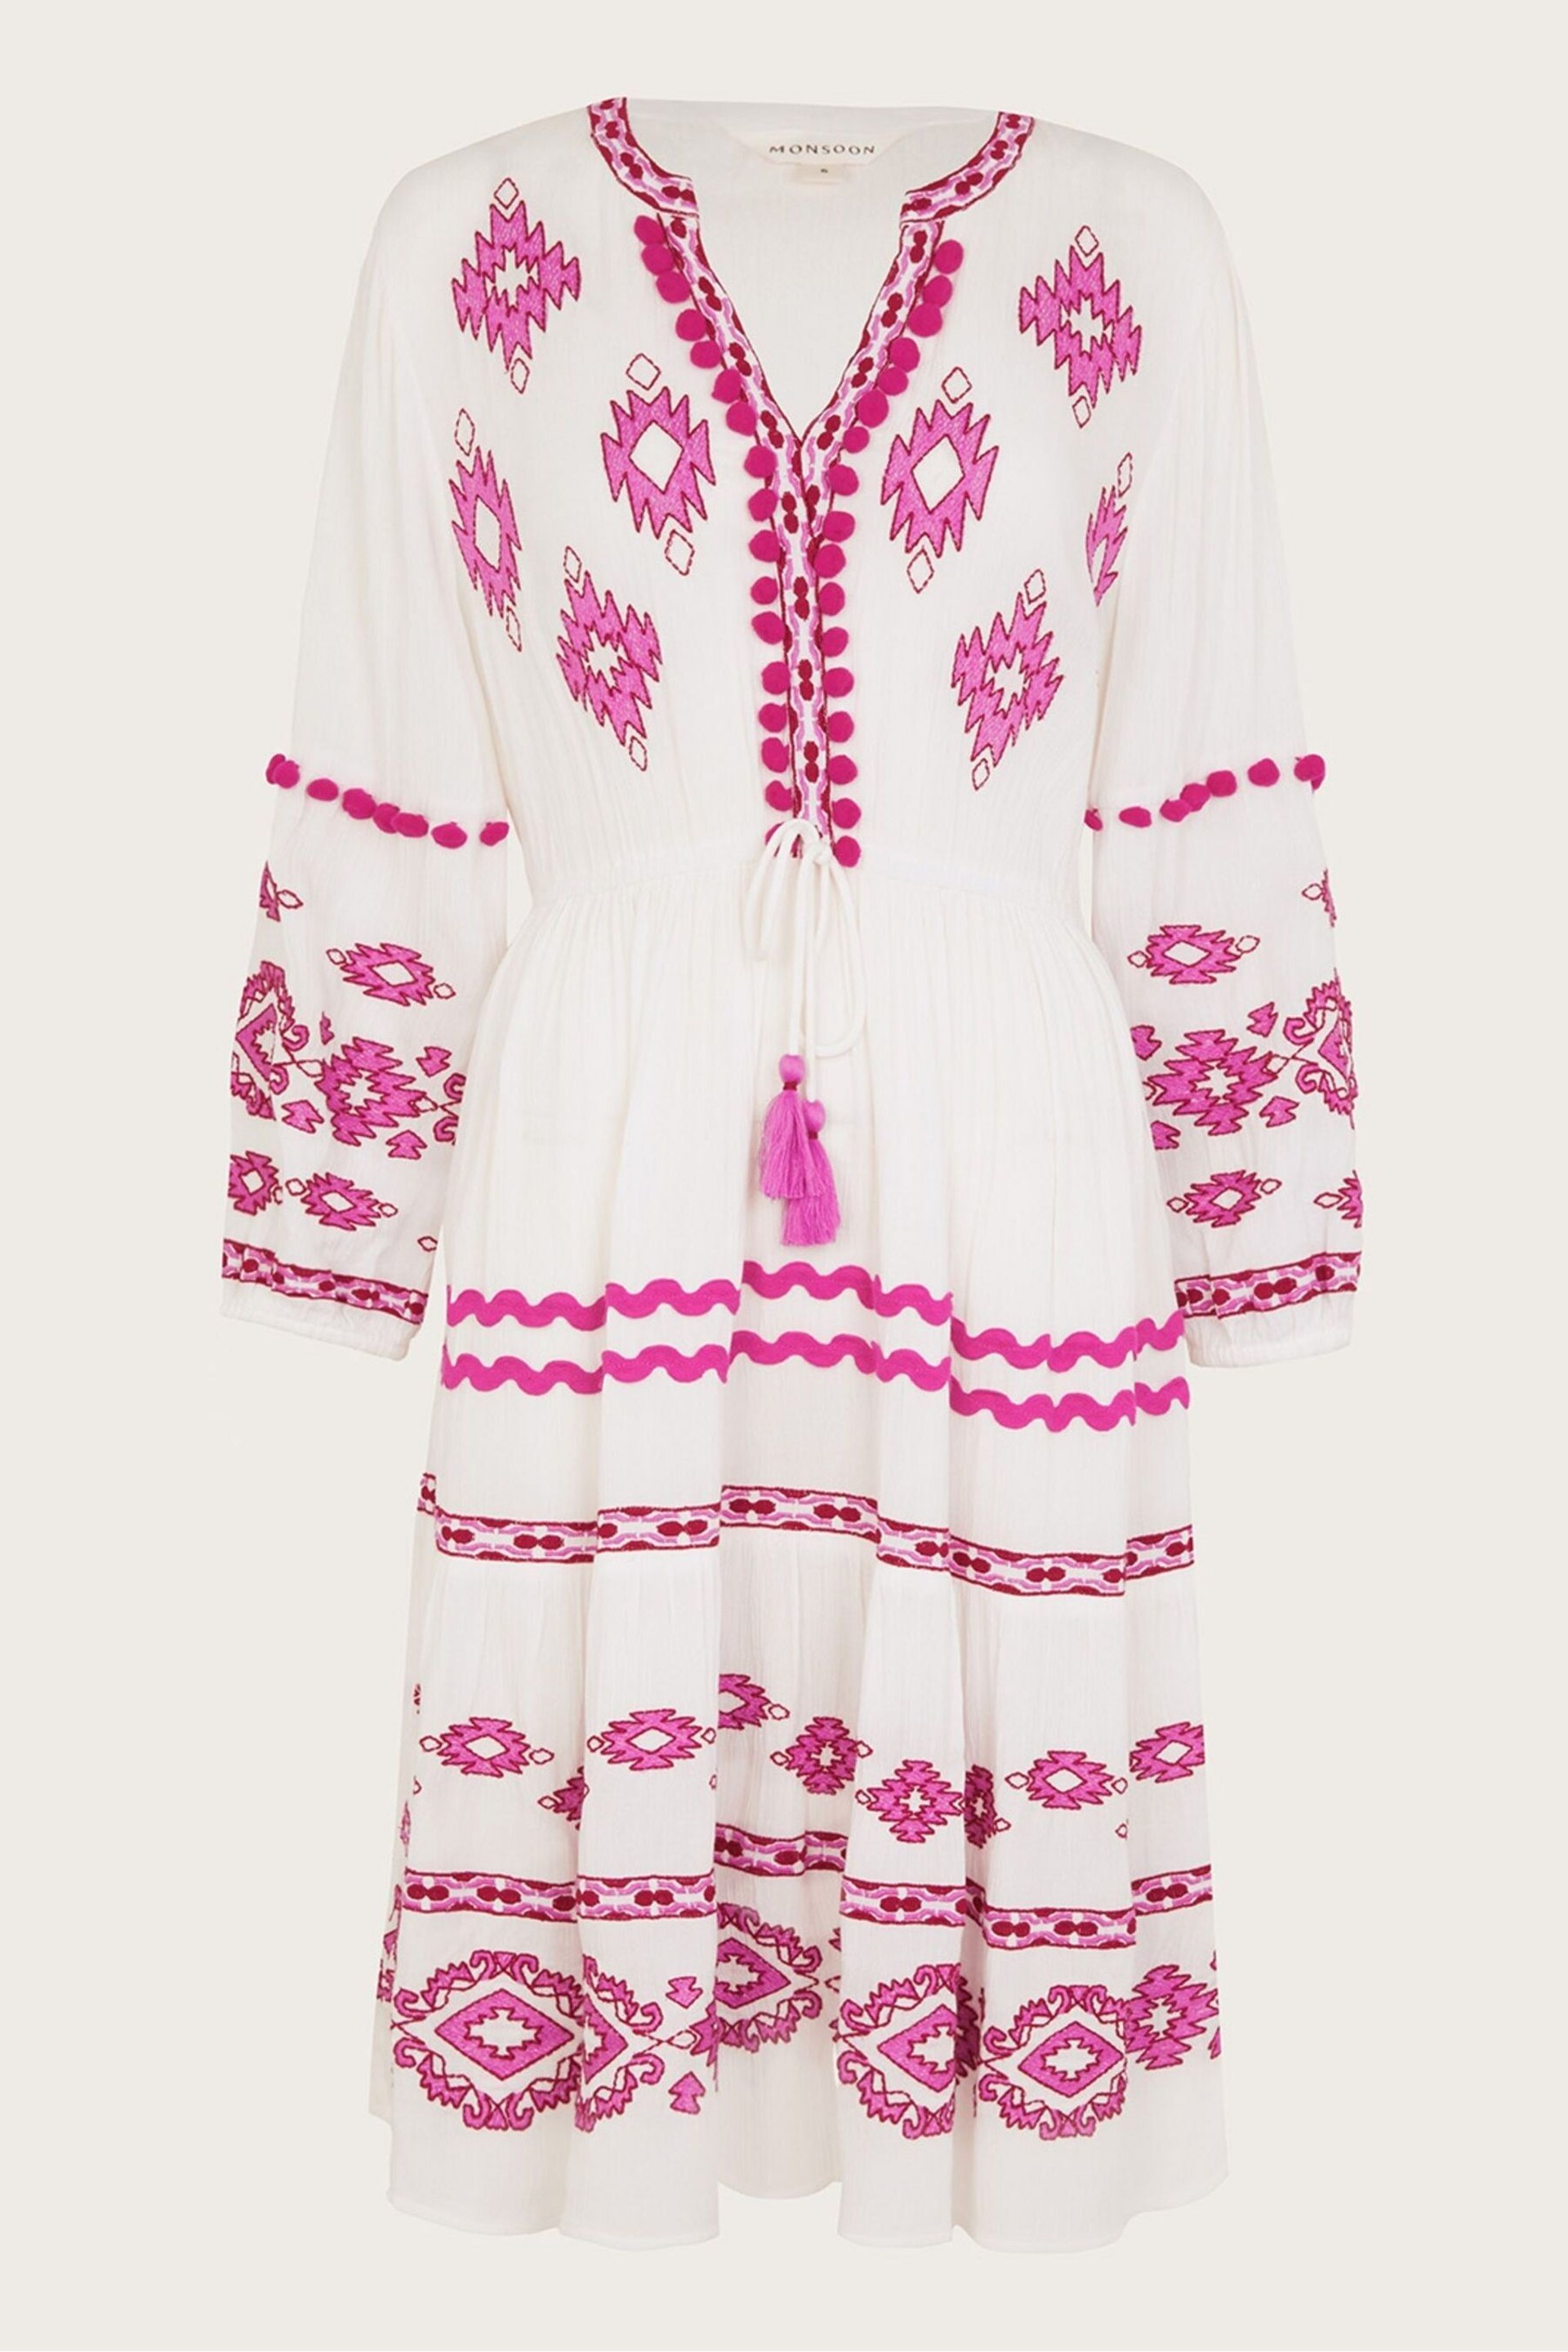 Monsoon White Embroidered Catia Dresses - Image 5 of 5